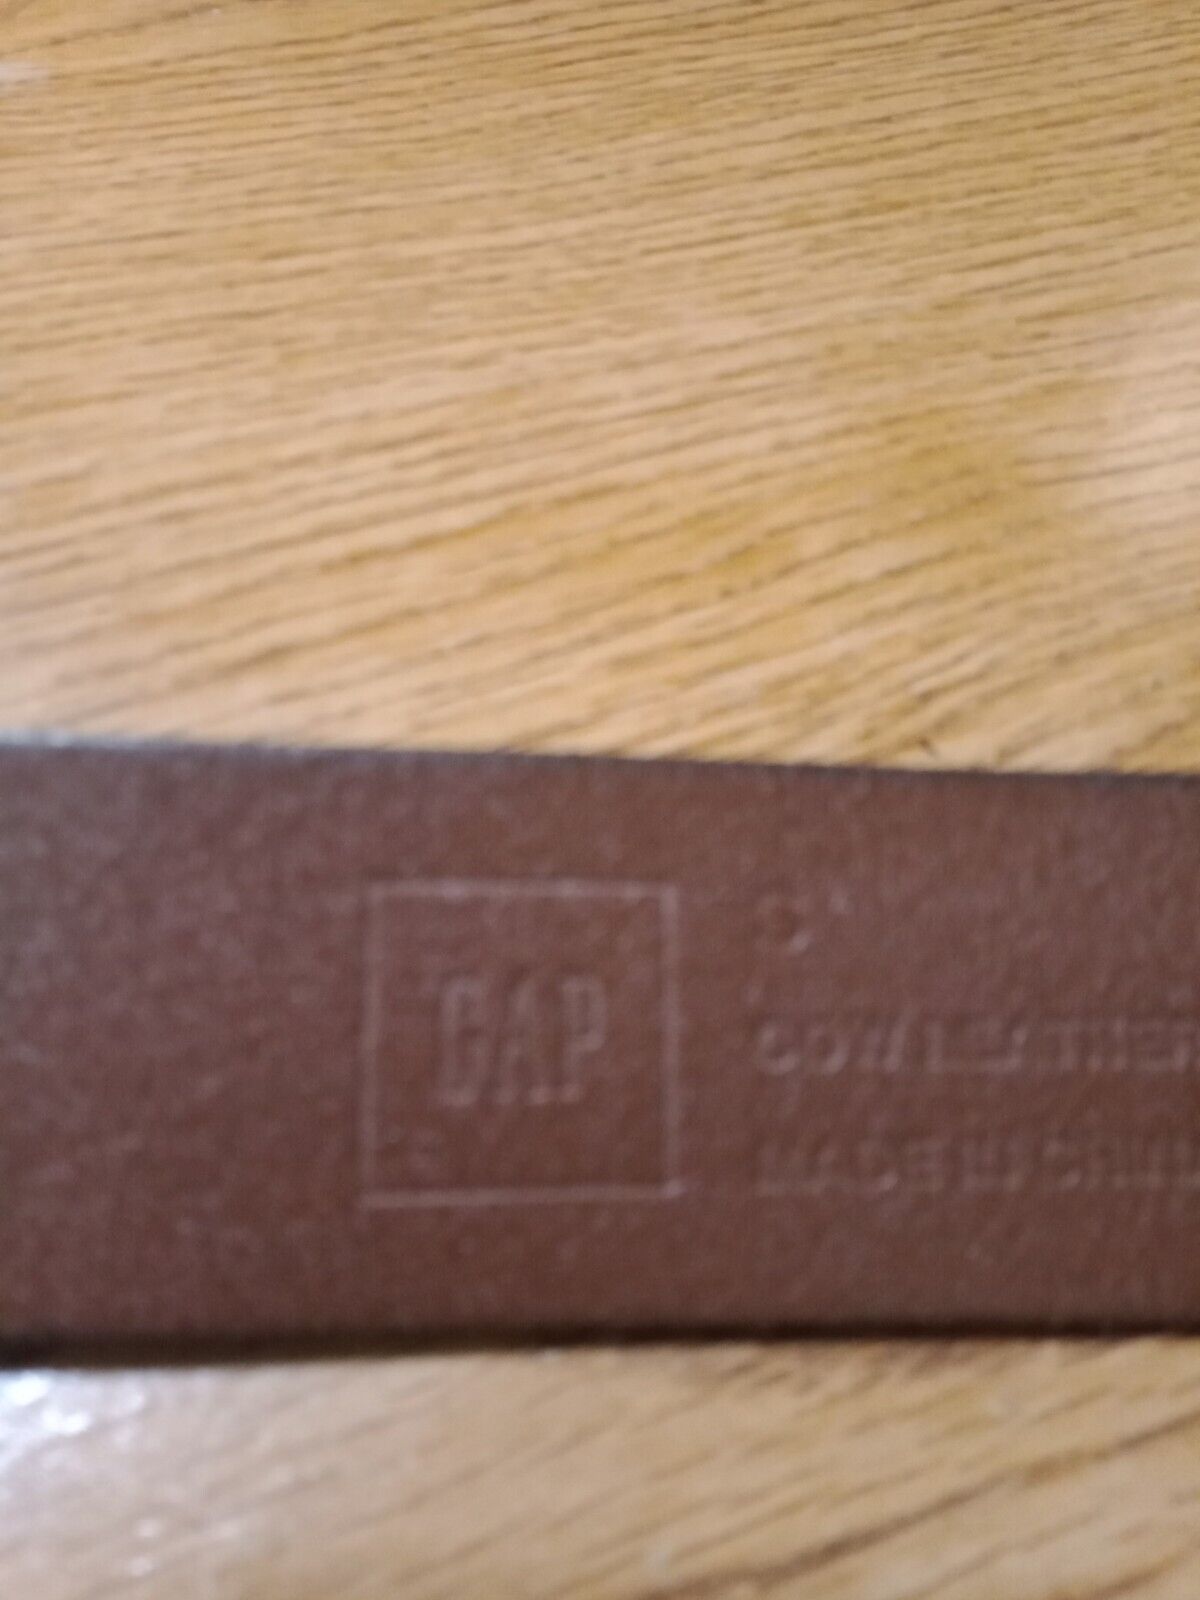 WOMEN'S GAP BROWN GENUINE COW LEATHER BELT SIZE S. - image 6